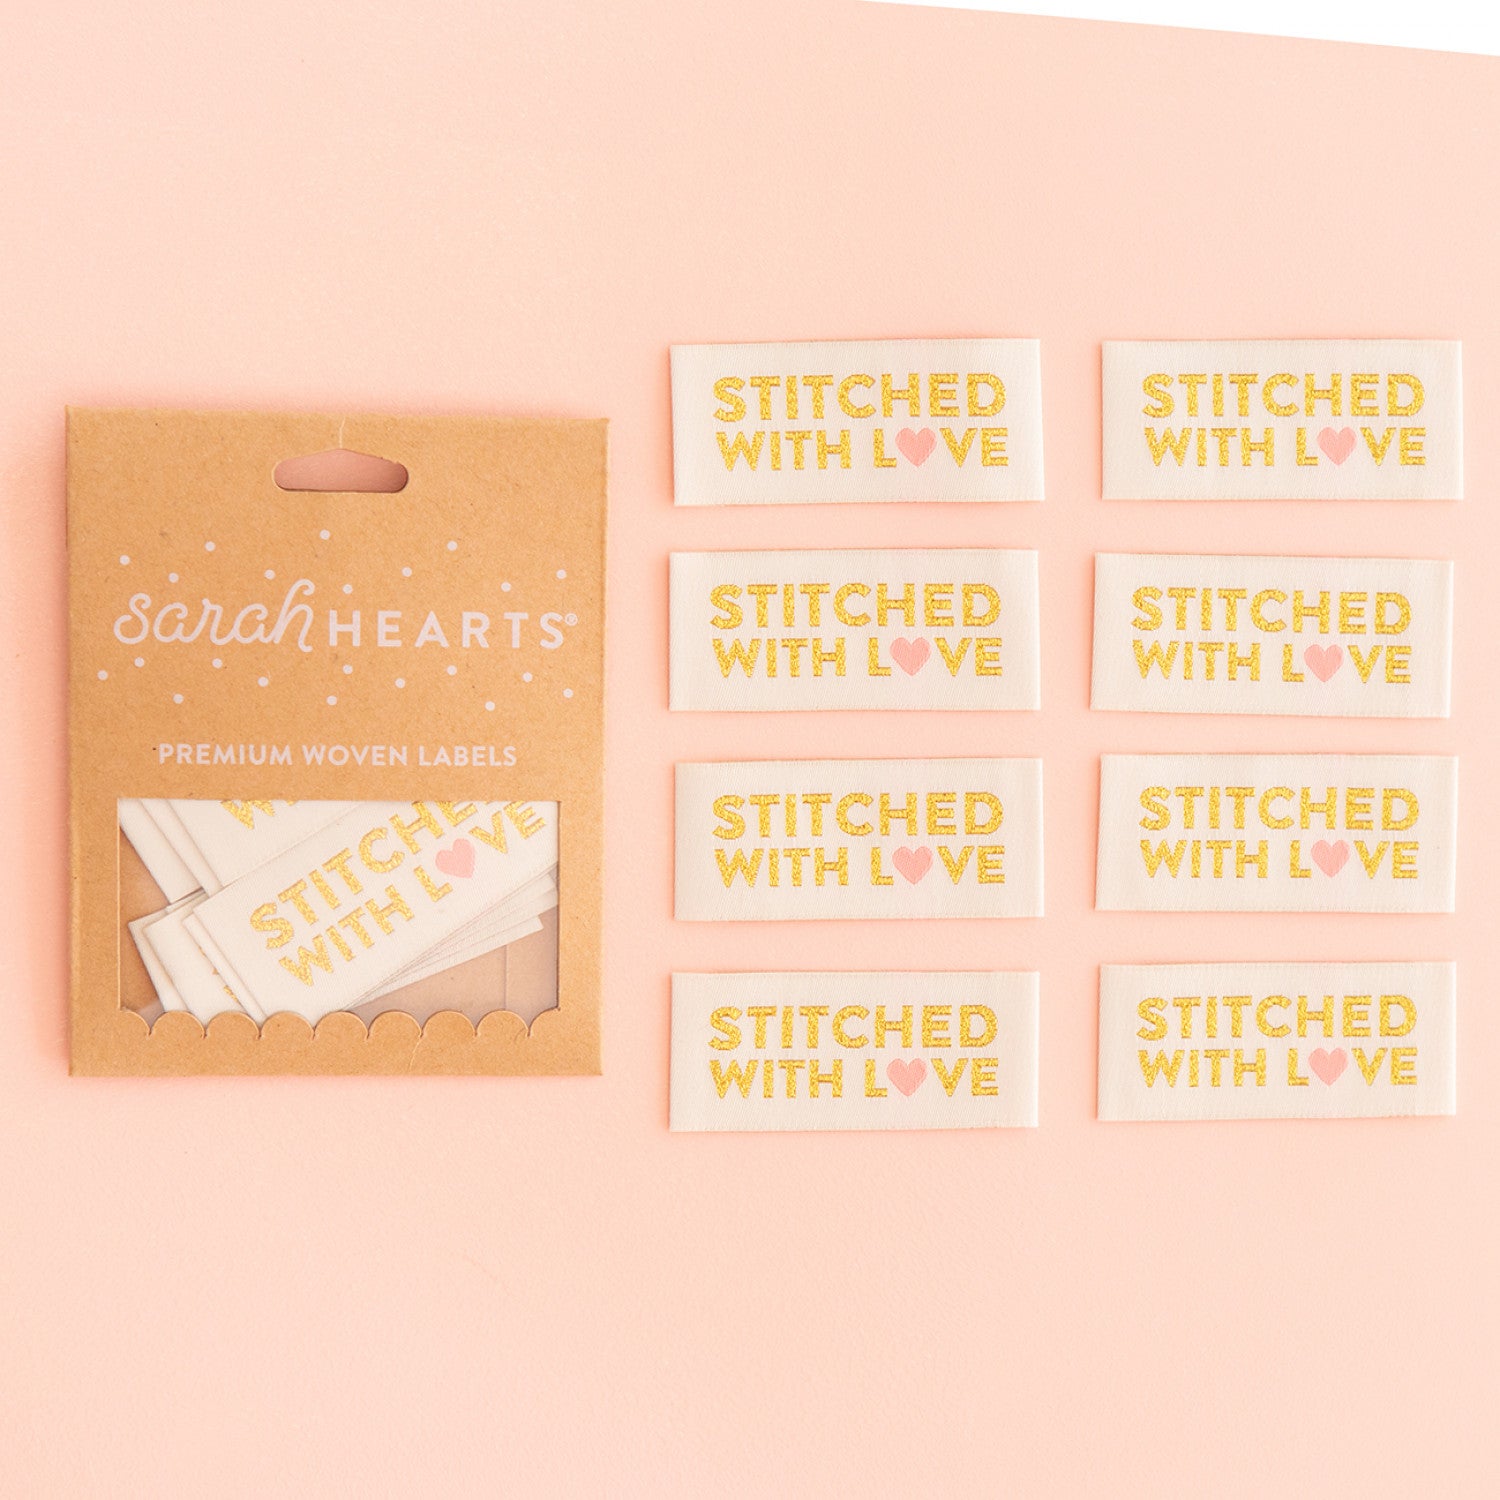 STITCHED WITH LOVE Gold Premium Woven Label 8-Pack from Sarah Hearts